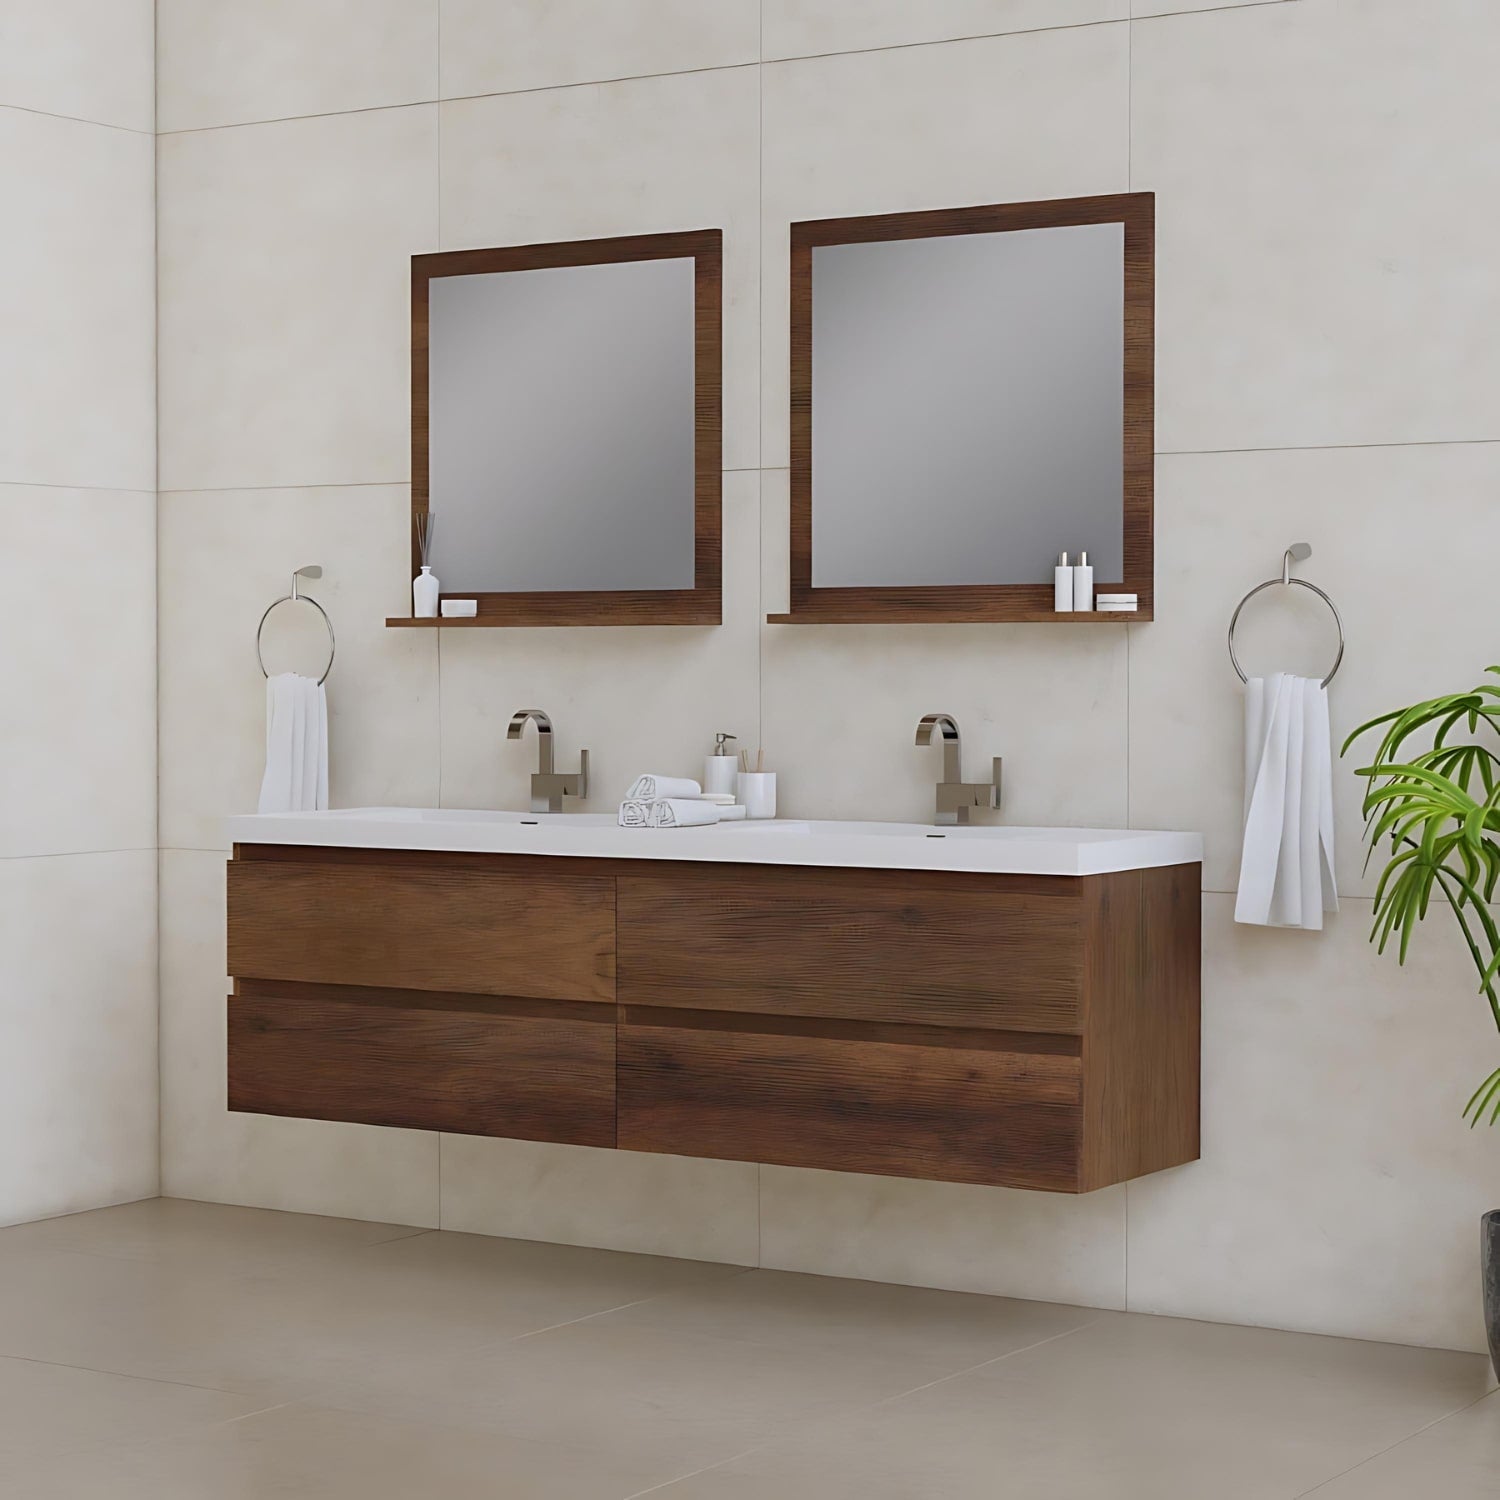 A seamless, clean floating bathroom vanity for your master bathroom